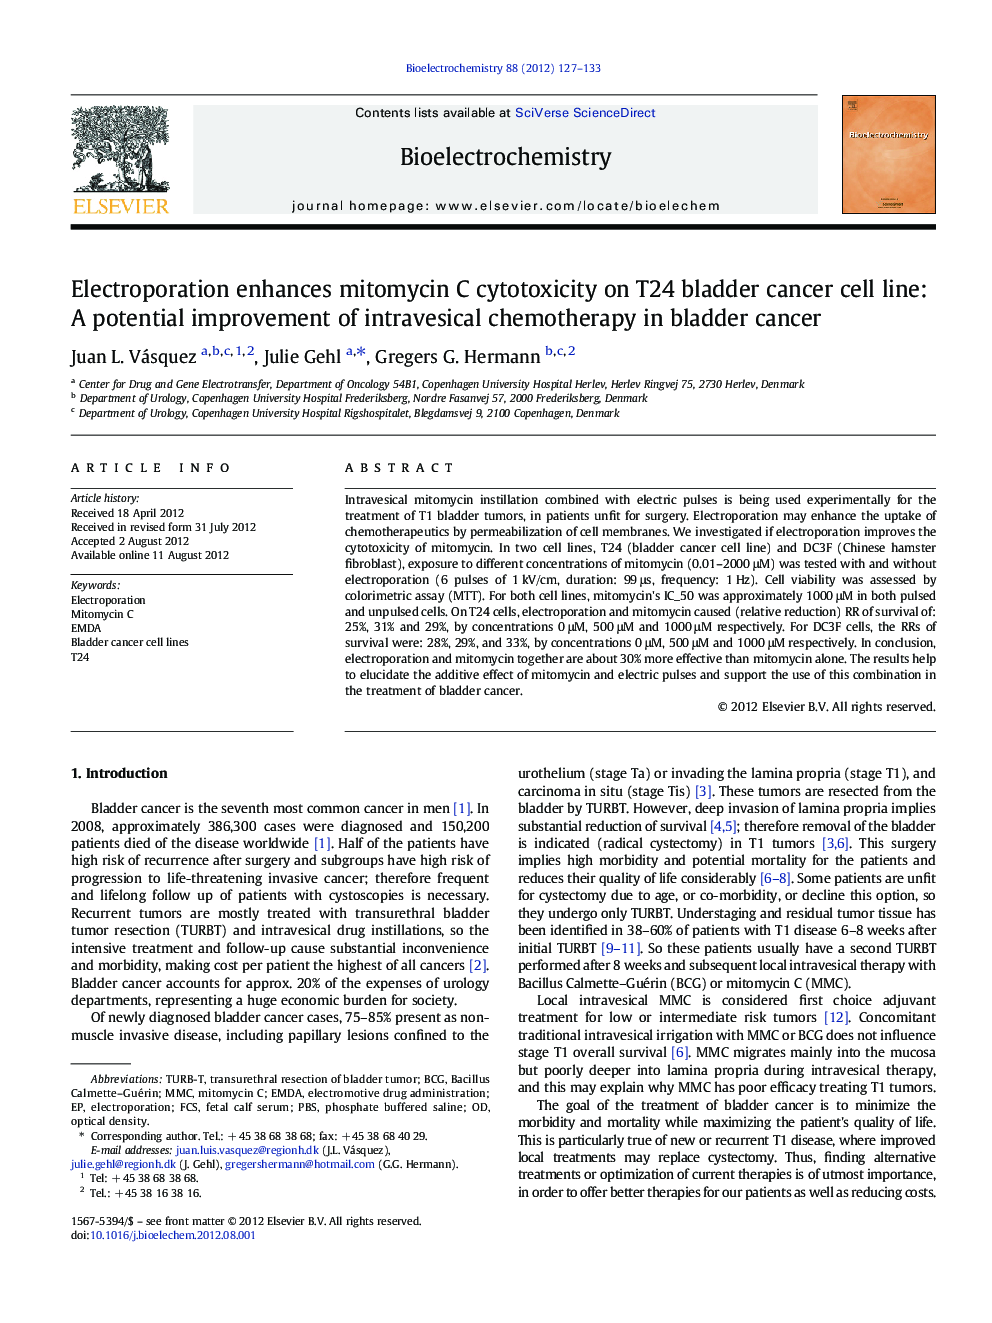 Electroporation enhances mitomycin C cytotoxicity on T24 bladder cancer cell line: A potential improvement of intravesical chemotherapy in bladder cancer